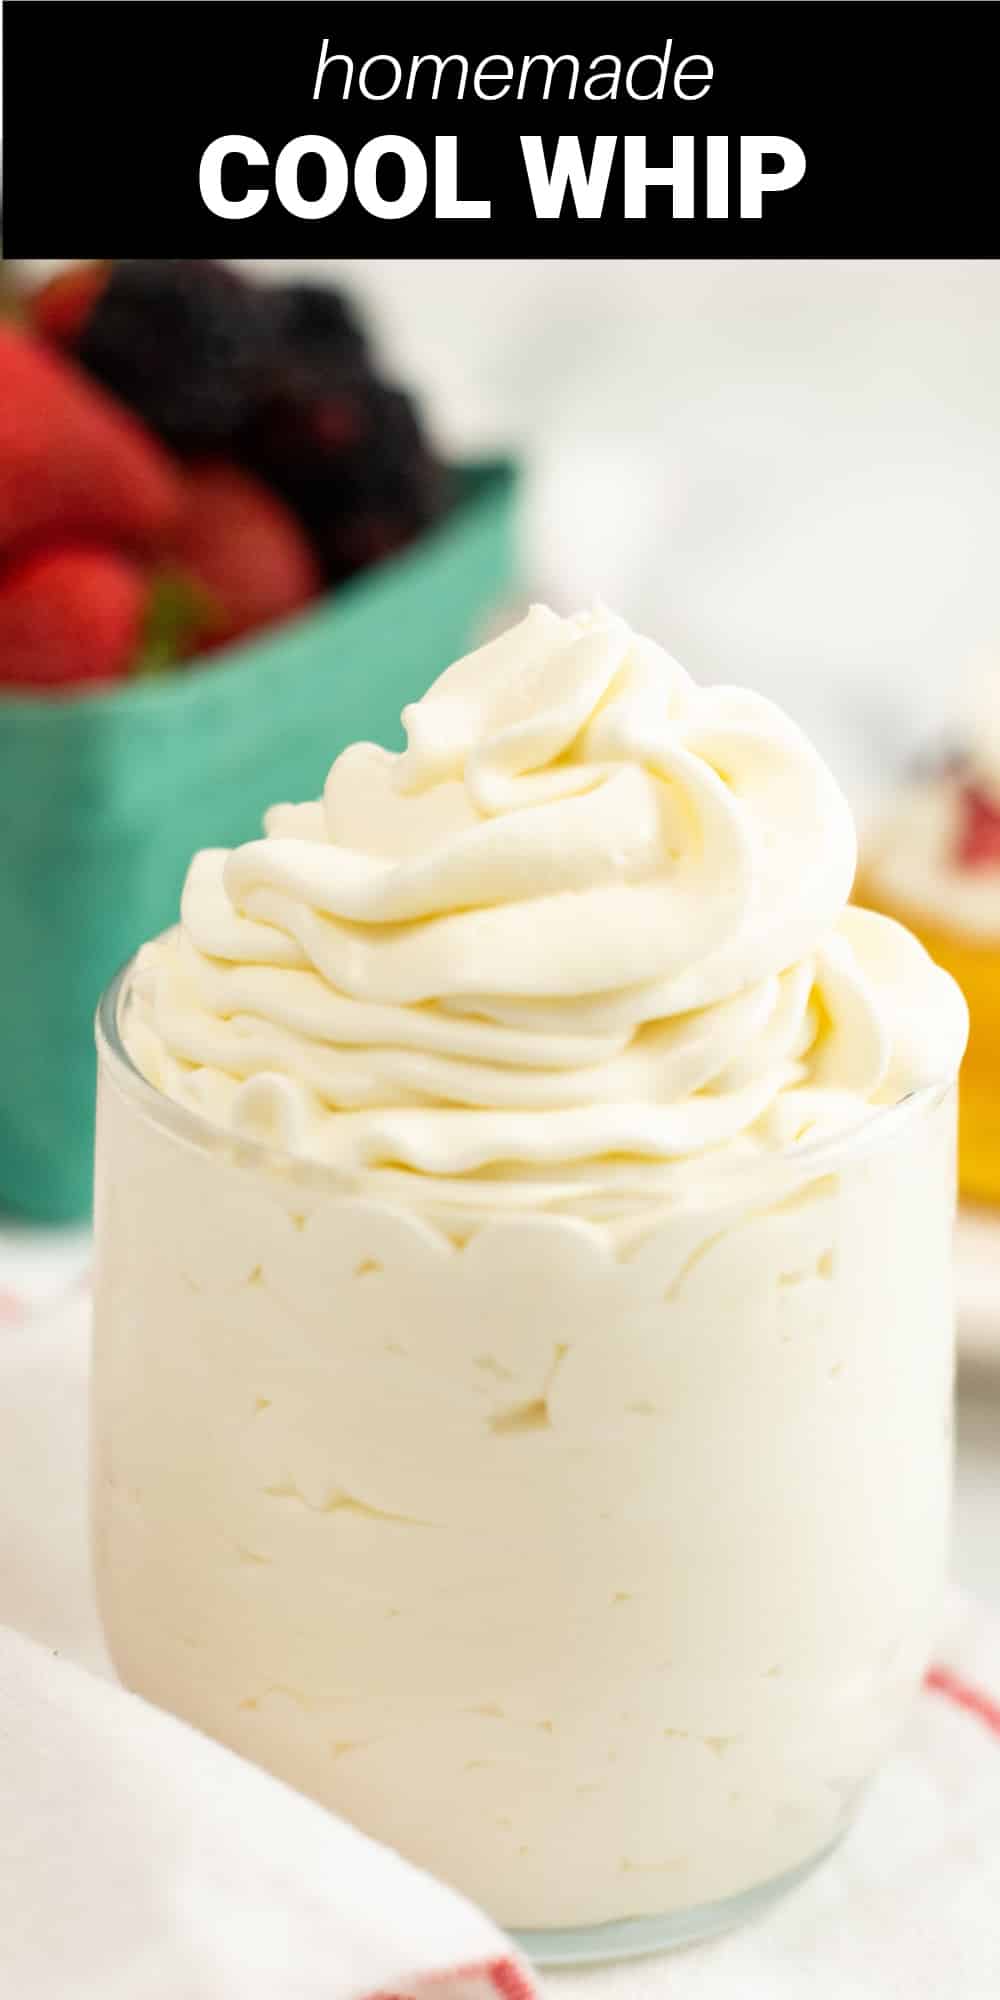 Skip the tub of artificial whipped topping and make your own homemade Stabilized Whipped Cream! With just four simple ingredients you can make a sweet and creamy topping that holds up perfectly for piping or decorating any of your favorite desserts or as a substitute in recipes that call for Cool Whip.